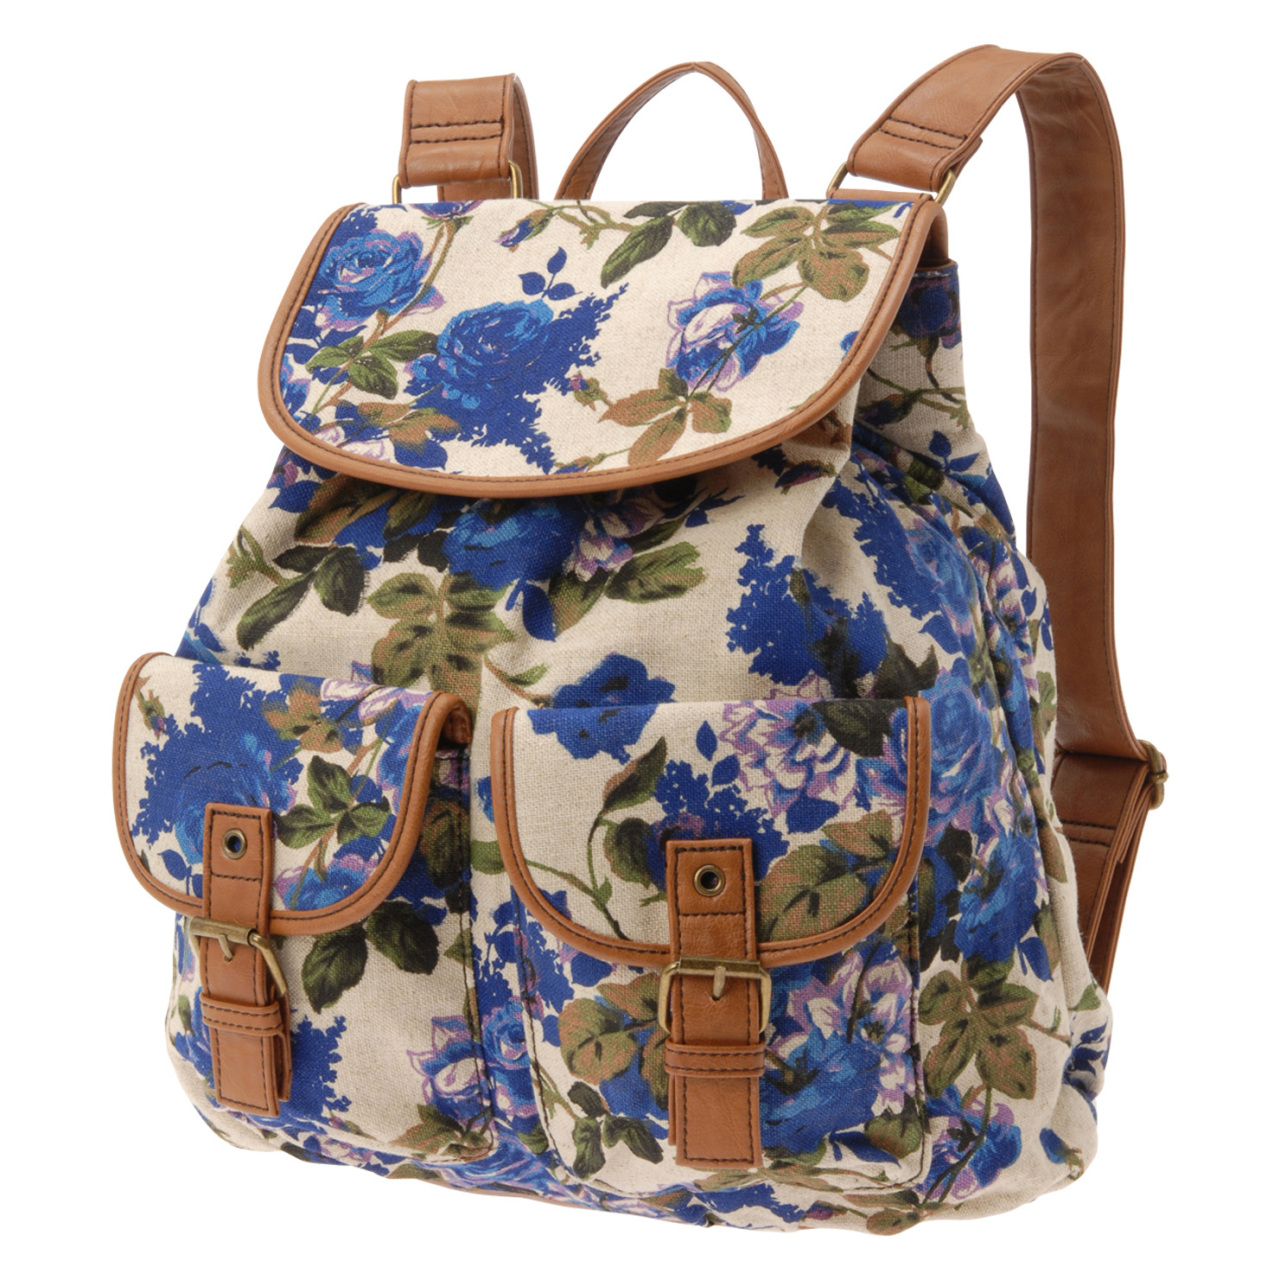 Backpacks - Awesome Girly School Things!